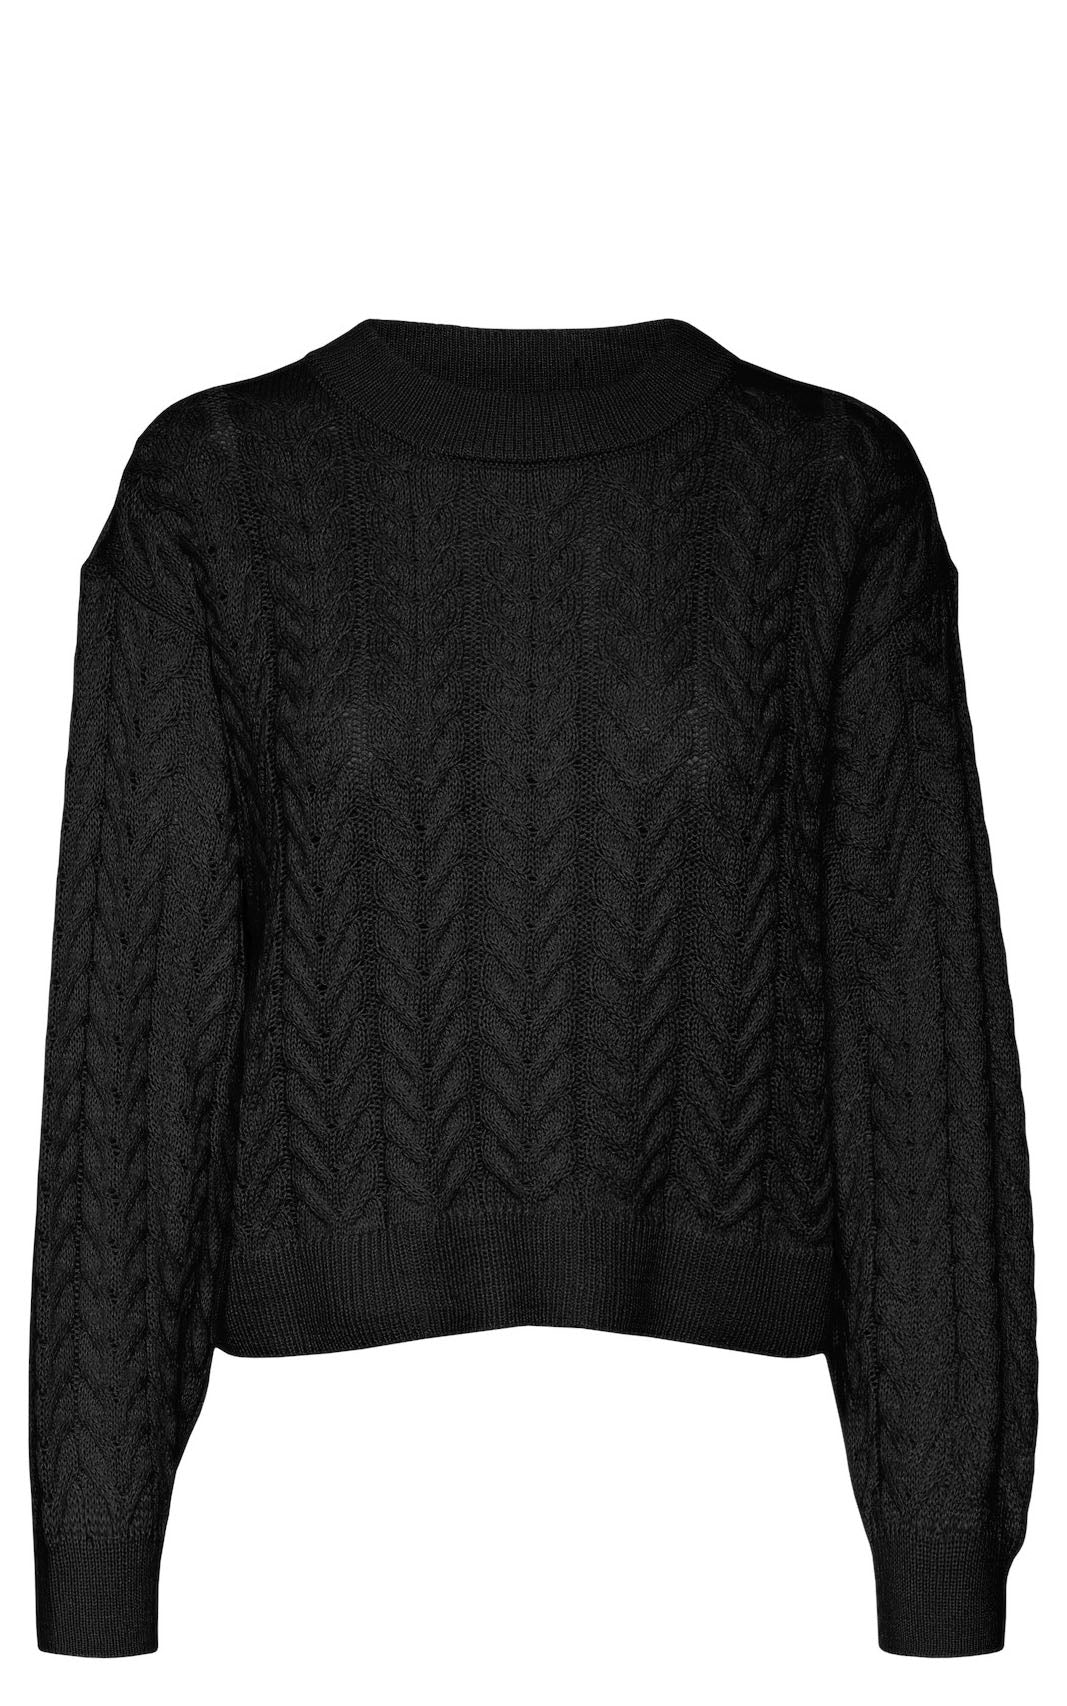 Fabulous Cable Sweater in Black